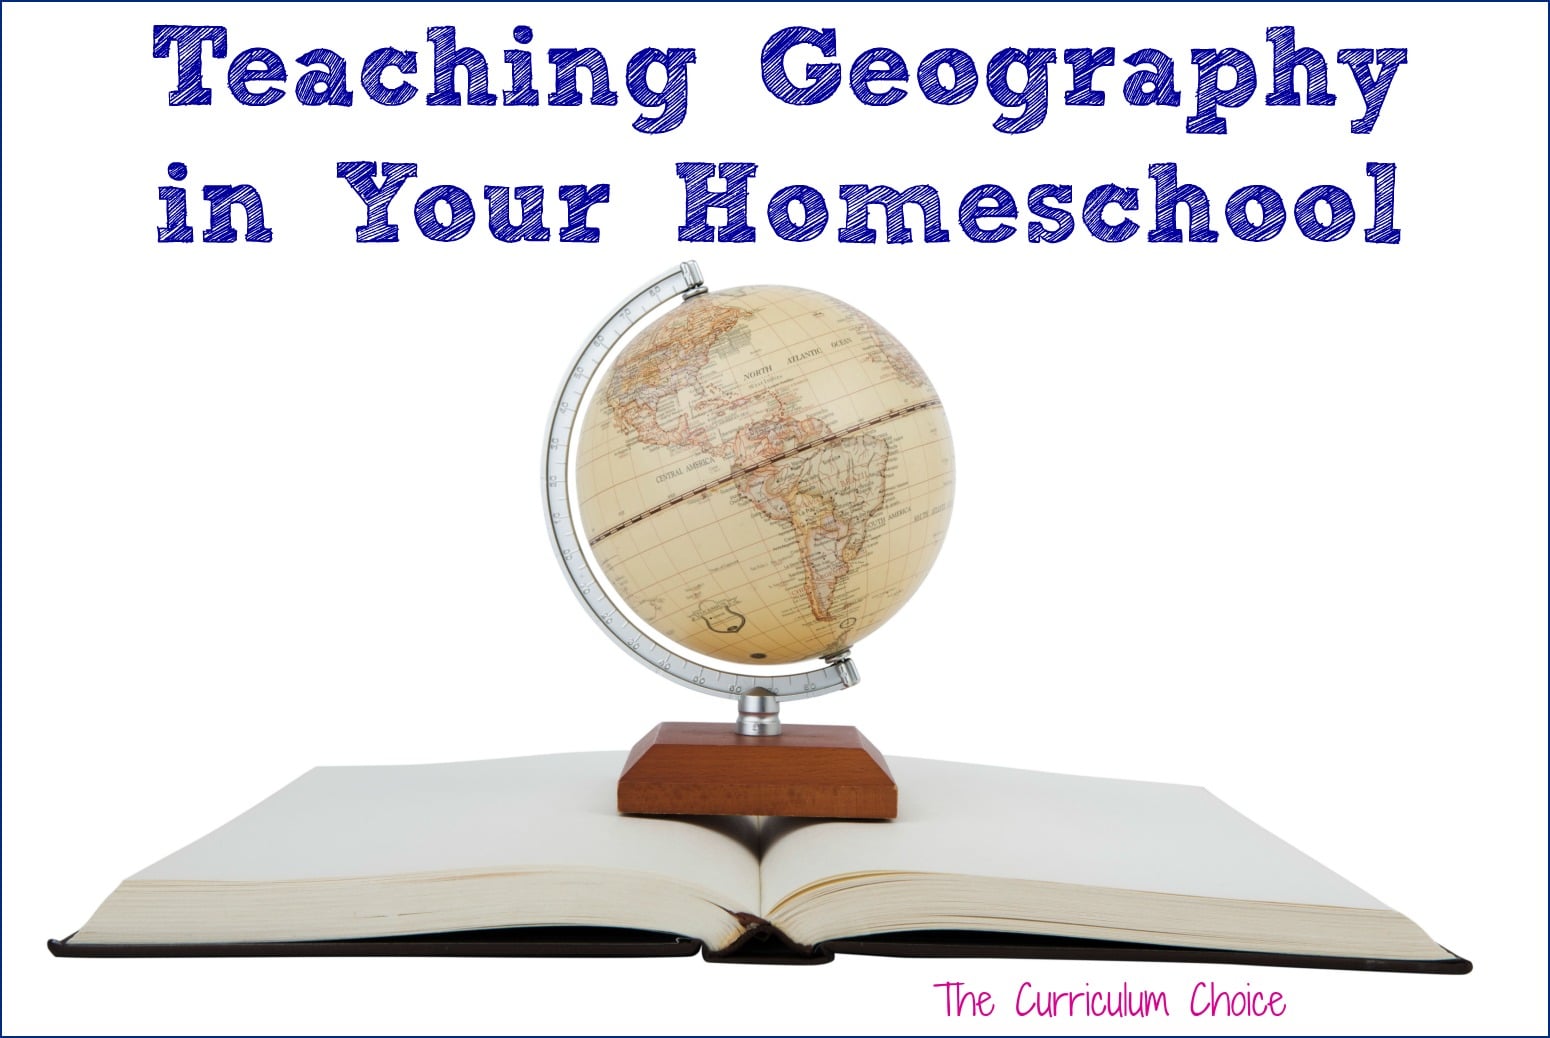 Teaching Geography in Your Homeschool